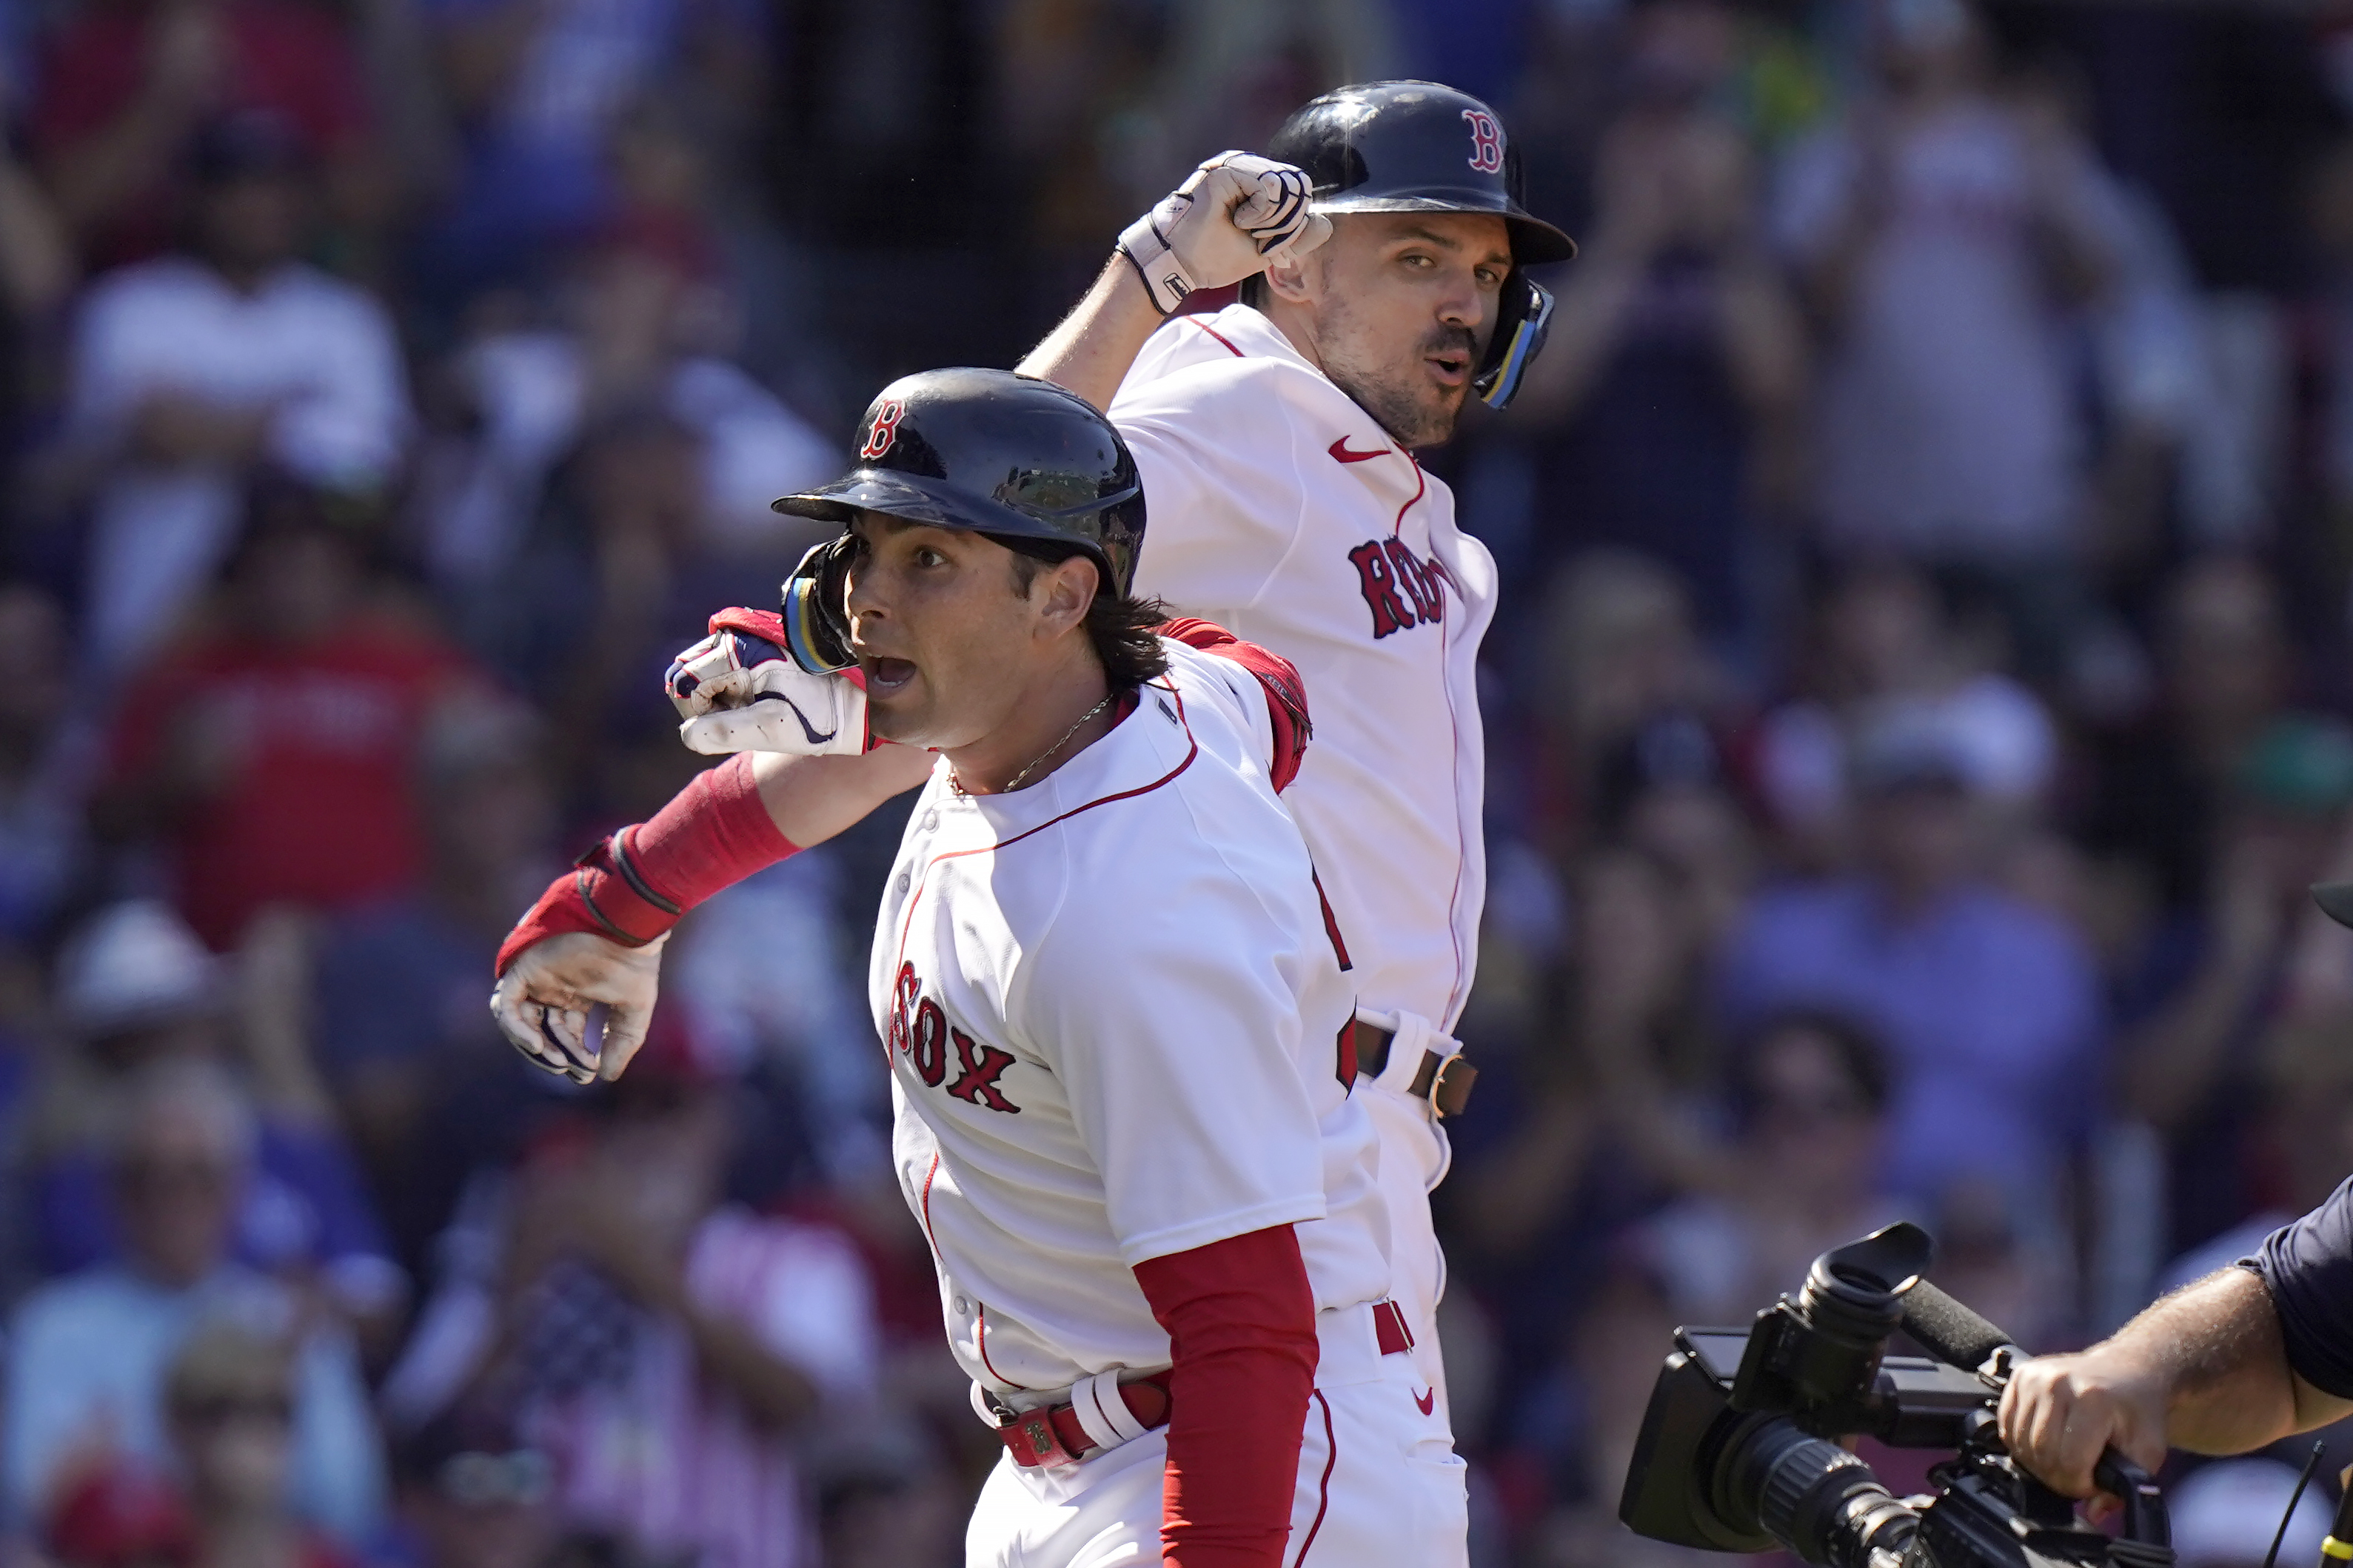 Mookie Betts caps Boston return with another homer as Dodgers beat Red Sox  7-4